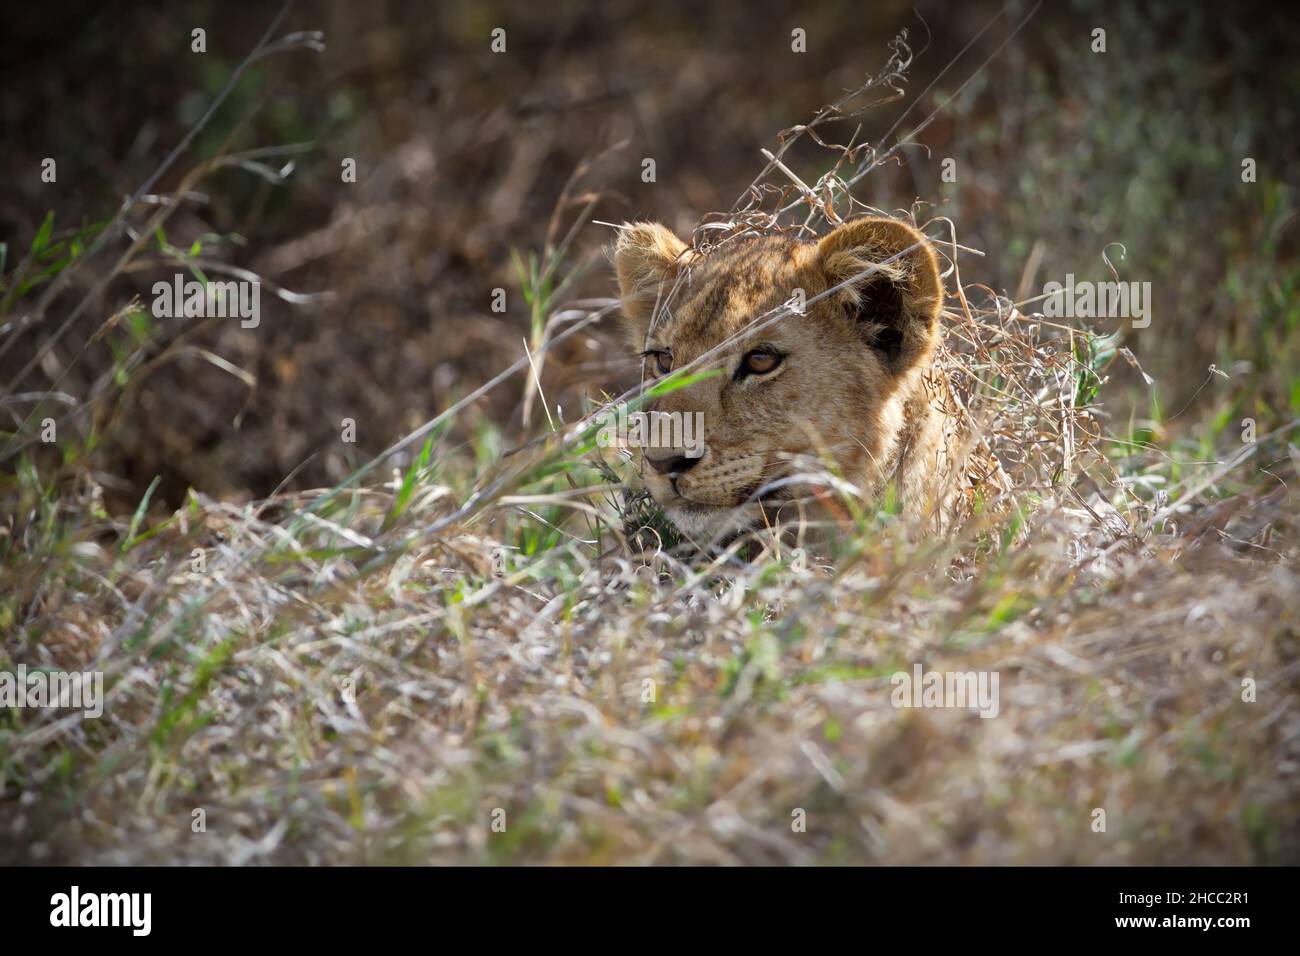 Lioness in Tanzania nature during daylight Stock Photo